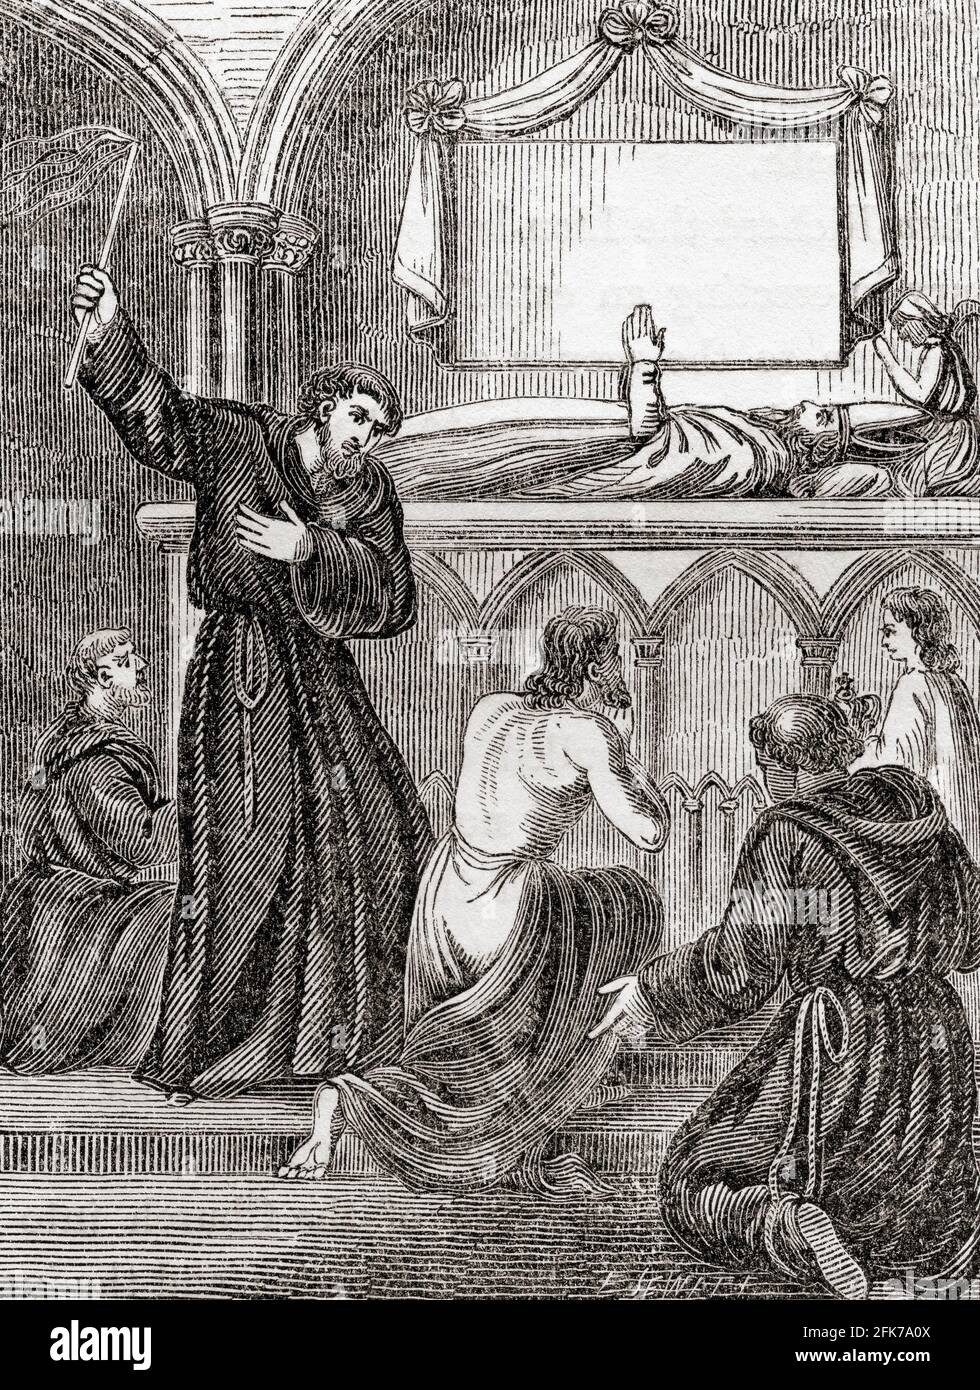 Penance of Henry II at the tomb of Thomas Becket, Canterbury, 12 July 1174. Henry II, 1133 – 1189, aka Henry Curtmantle, Henry FitzEmpress or Henry Plantagenet. King of England.  From The History of Progress in Great Britain, published 1866. Stock Photo